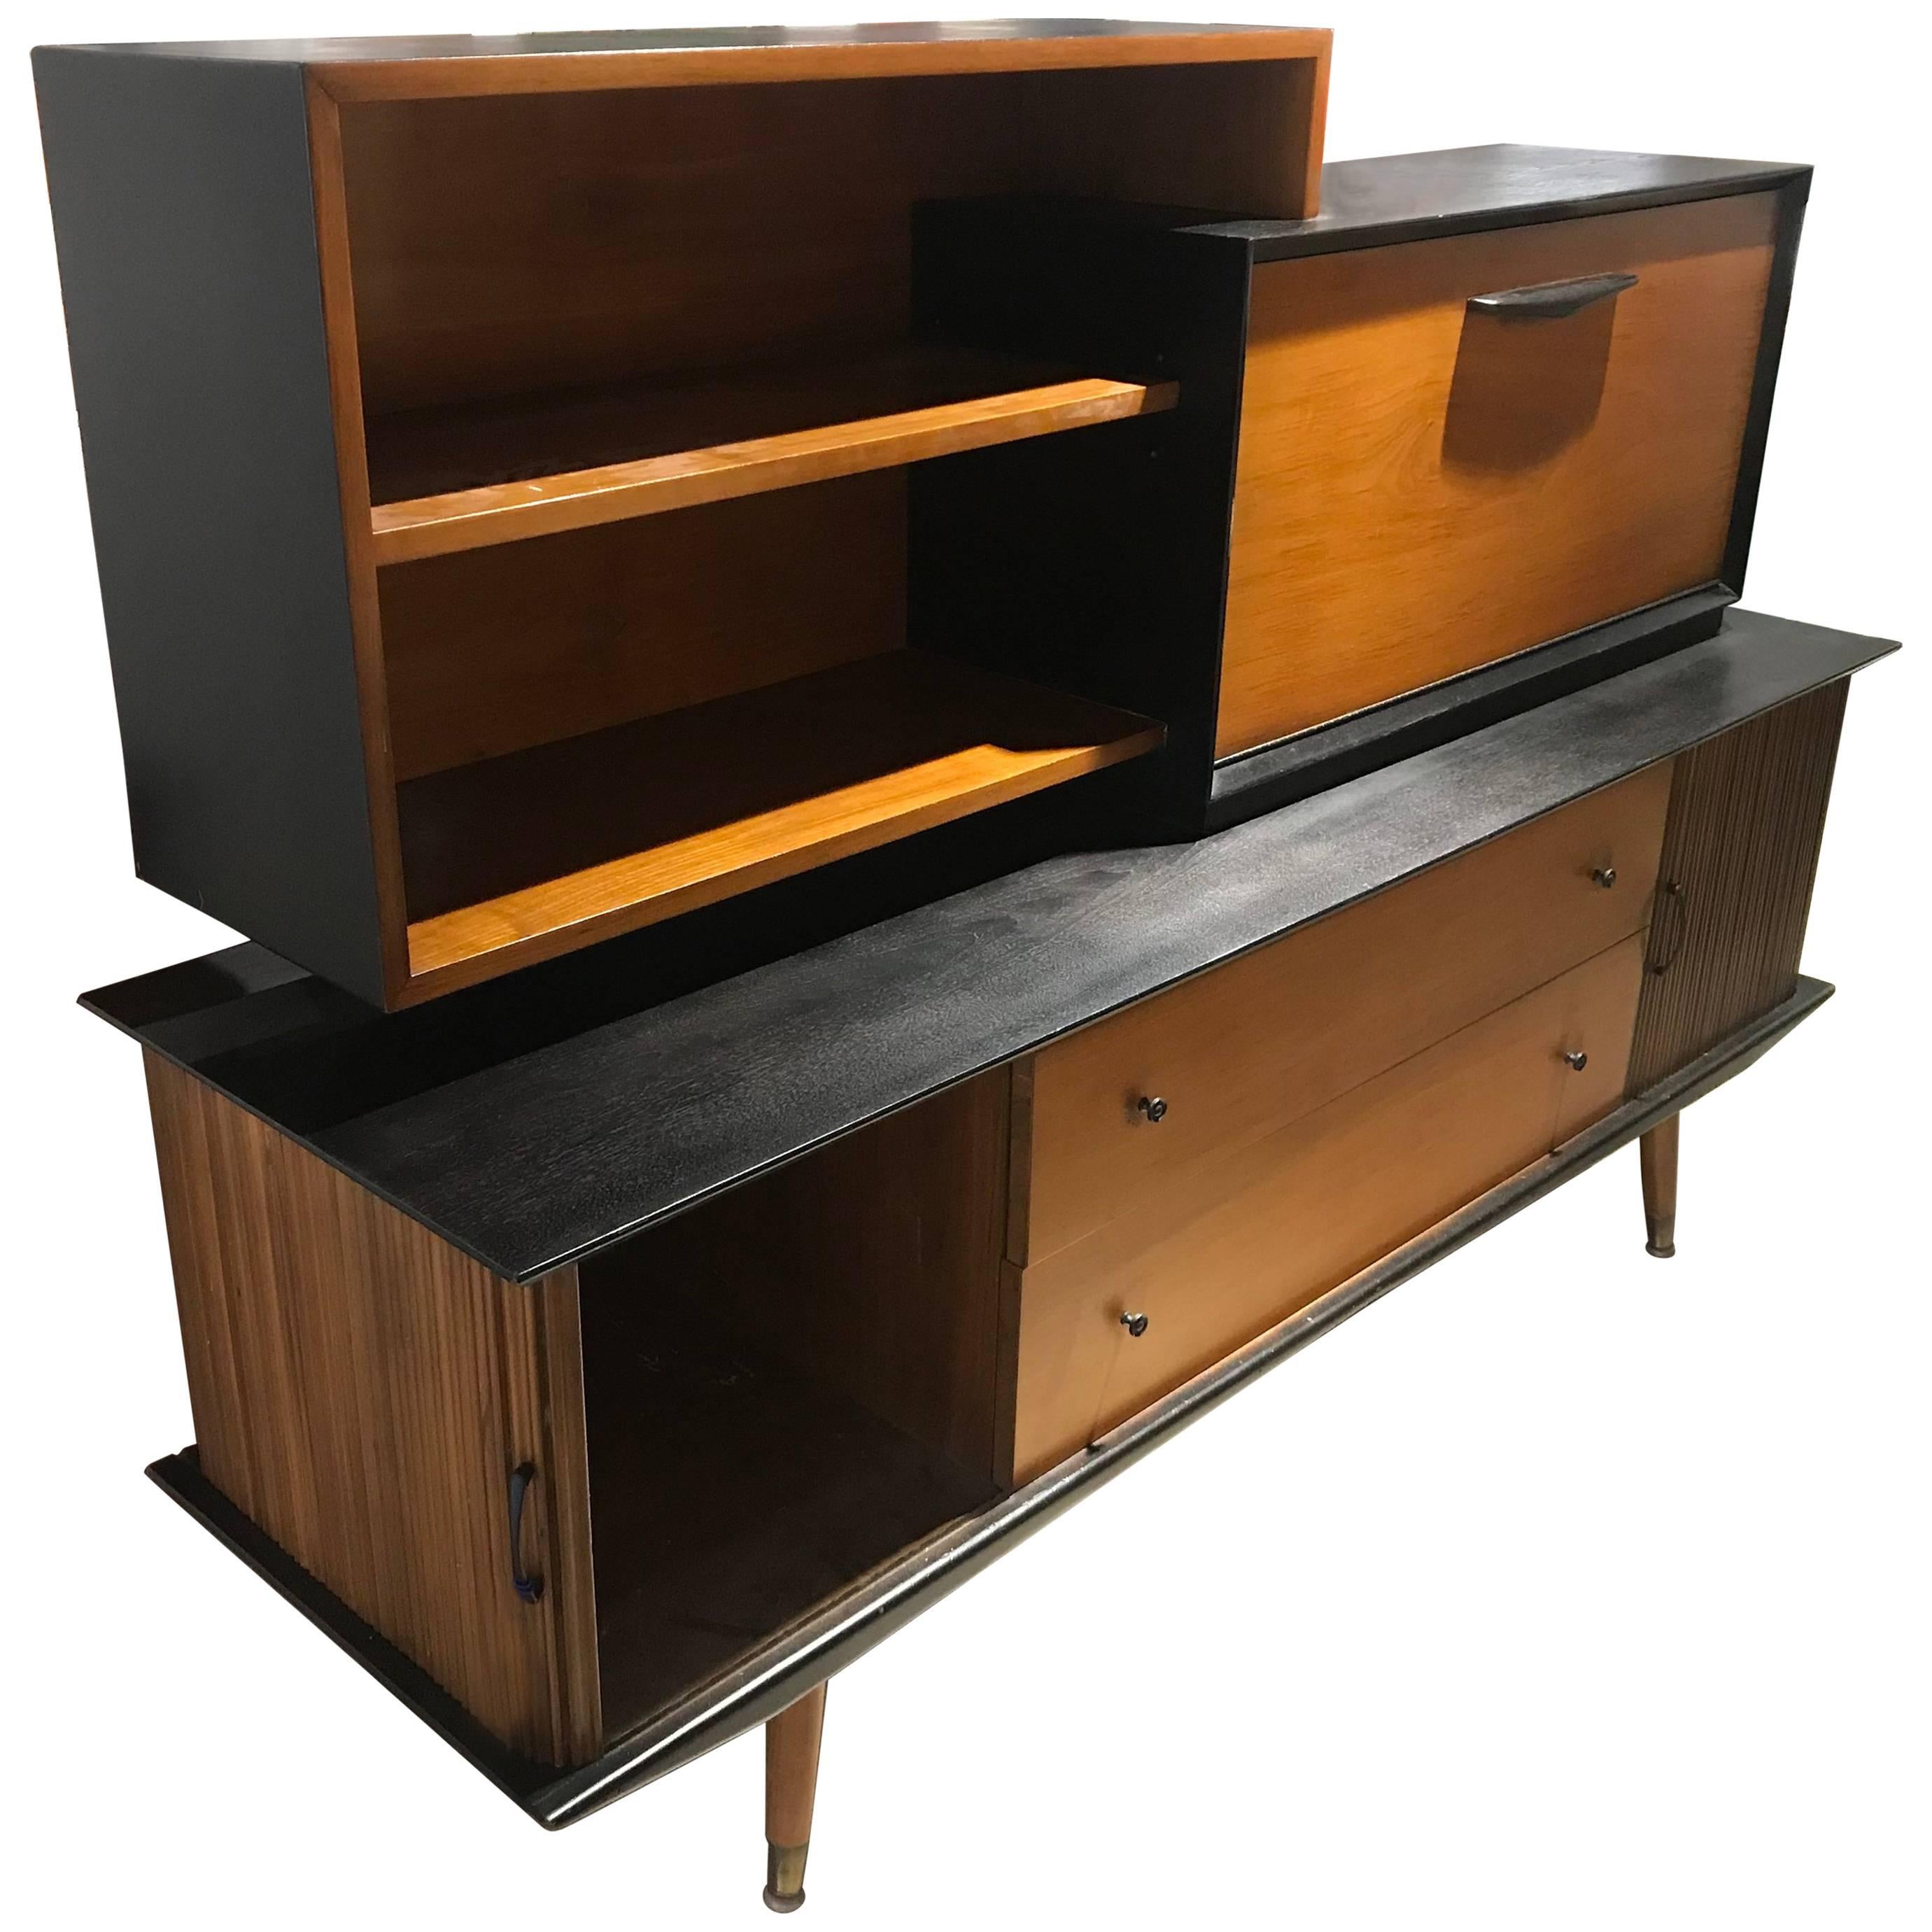 Modern Black and Walnut Tambour Door Credenza with a Bar Hutch